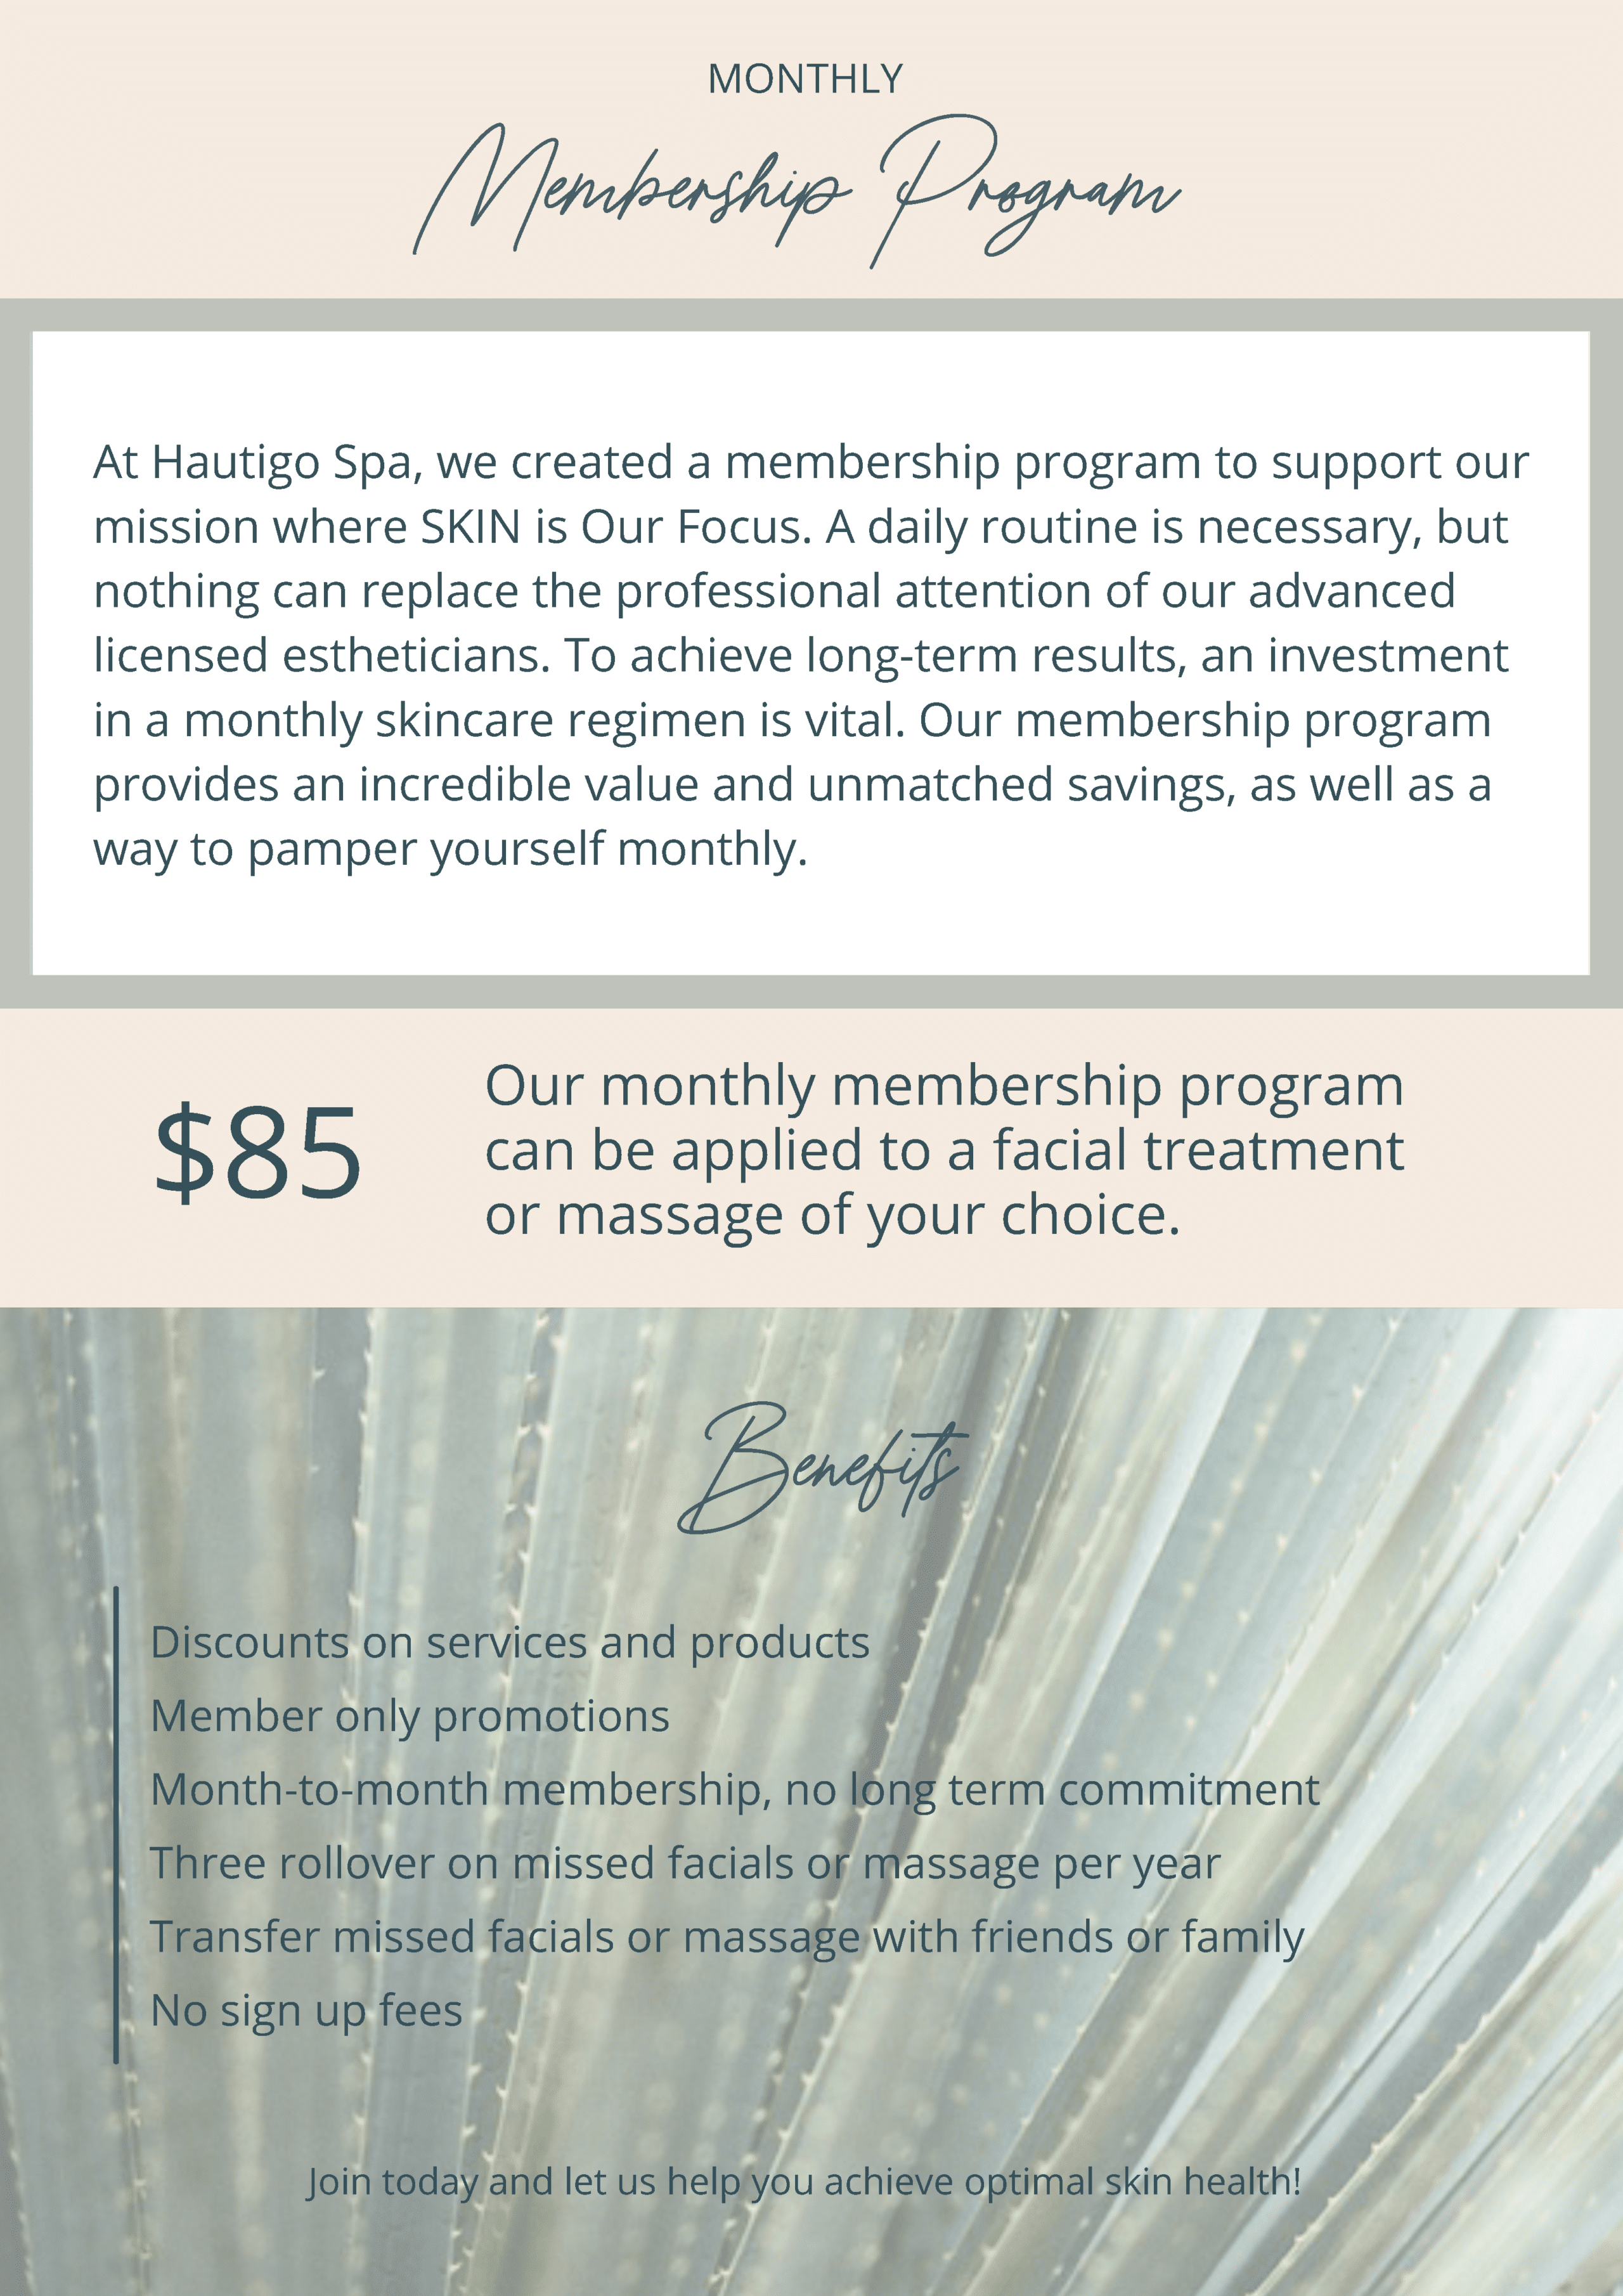 Our monthly membership program can be applied to a facial treatment or massage of your choice.